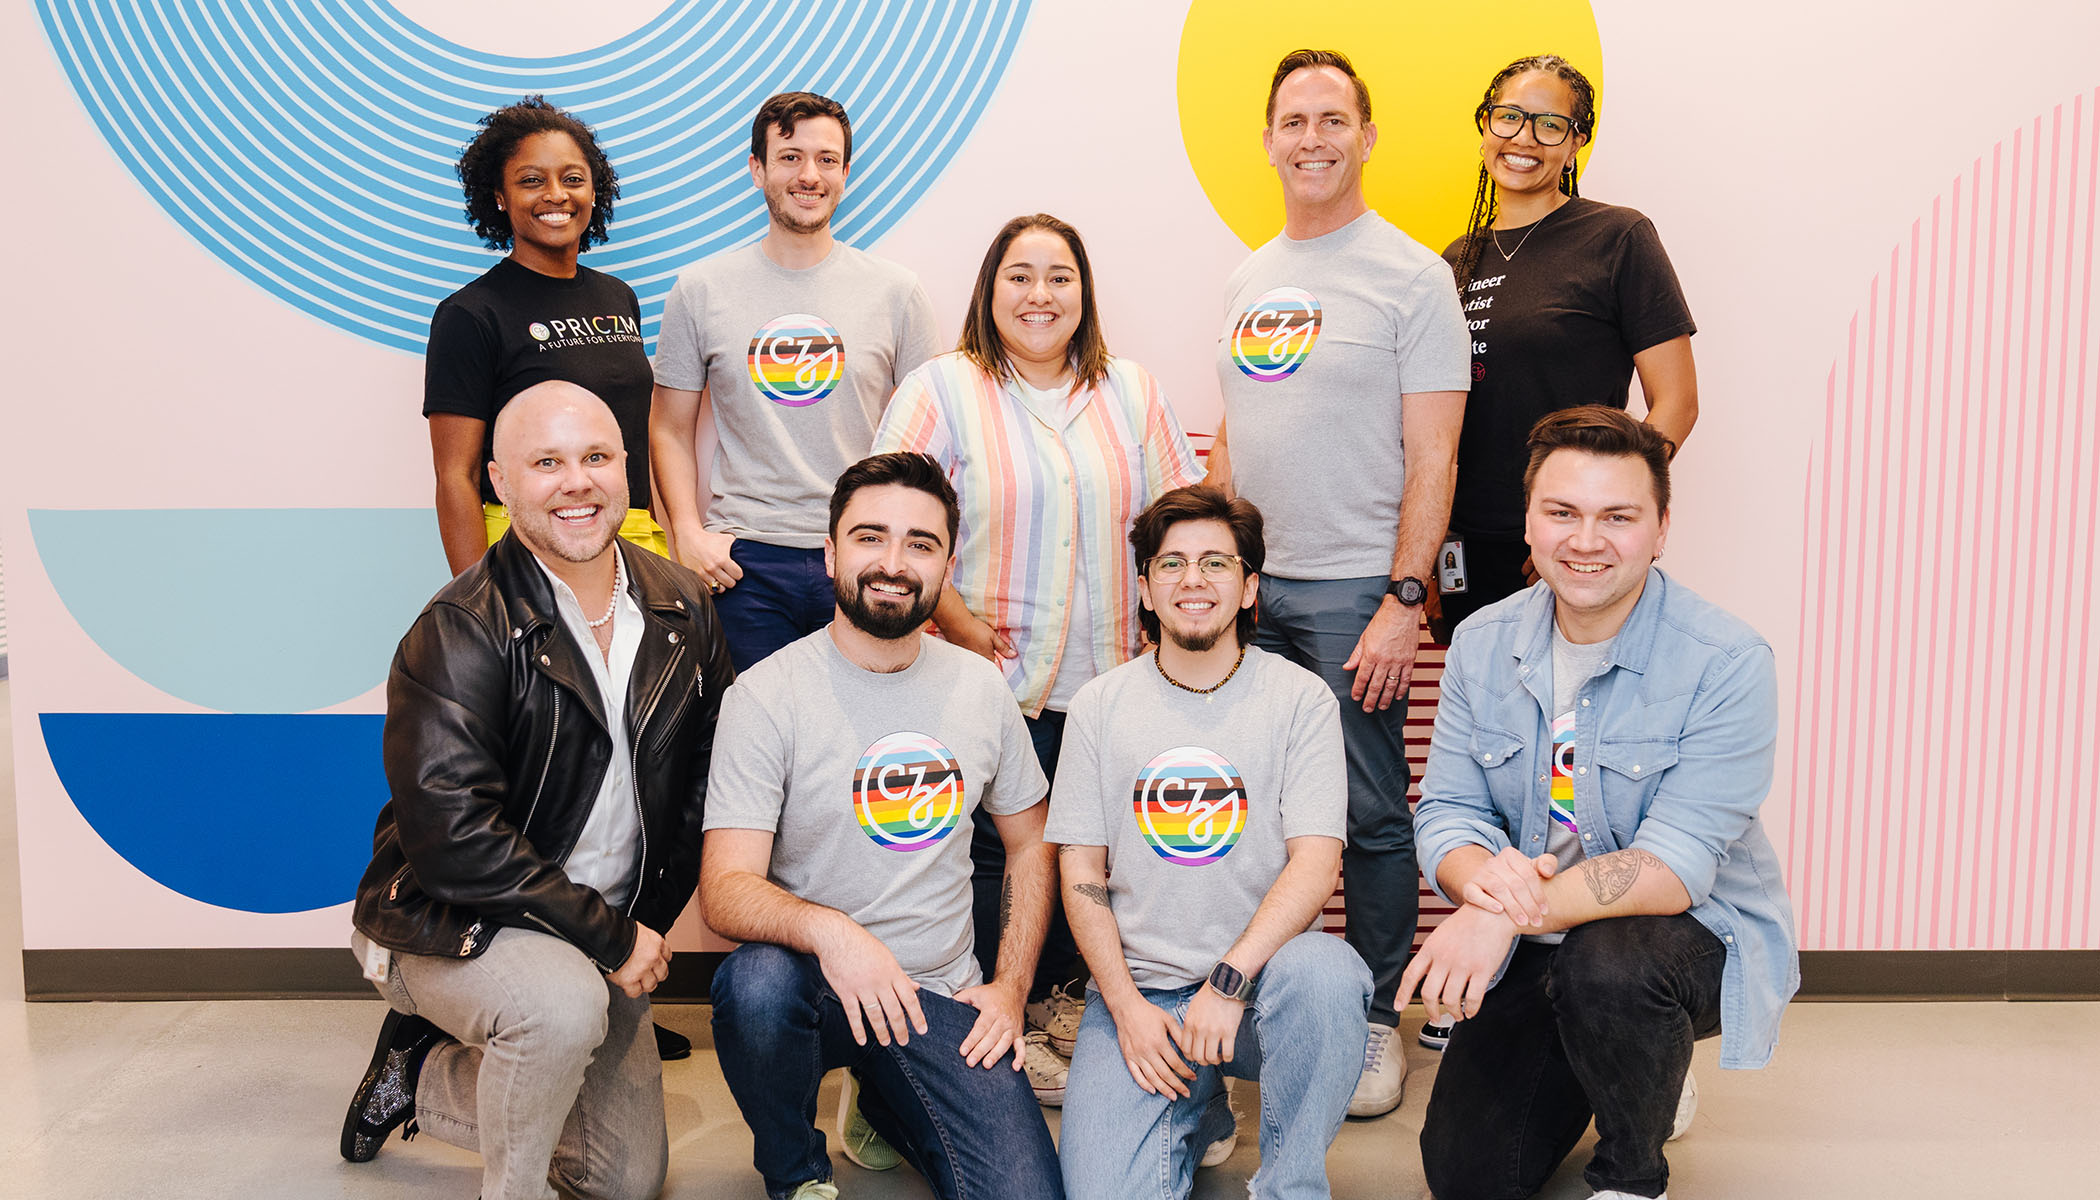 CZI’s PRICZM employee resource group aims to educate the CZI community on LGBTQAI+ issues and foster a diverse, equitable and inclusive workplace.